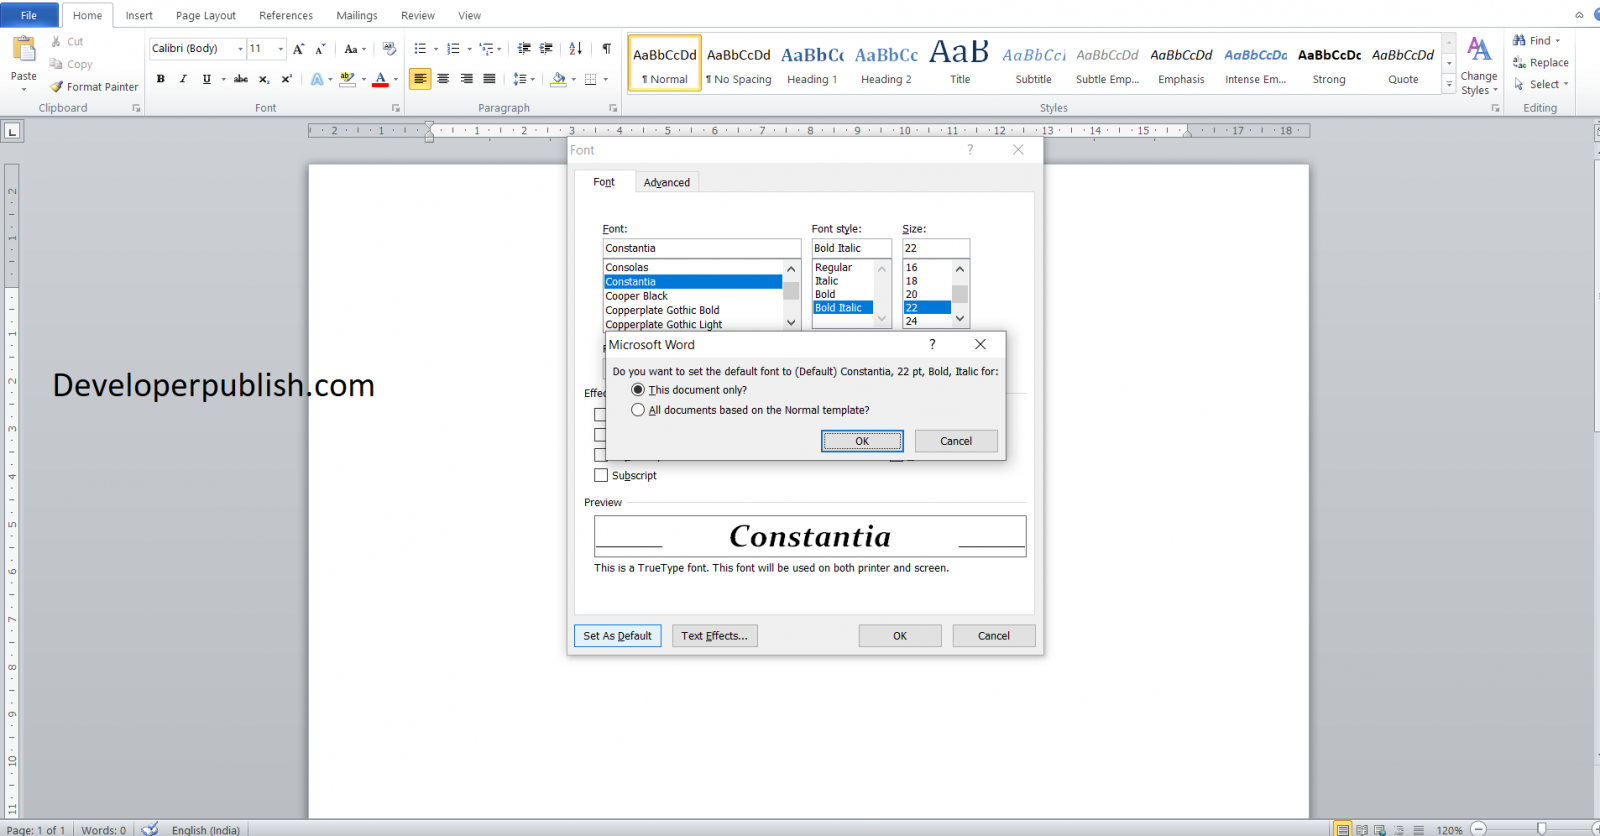 where is the dialog box launcher in word